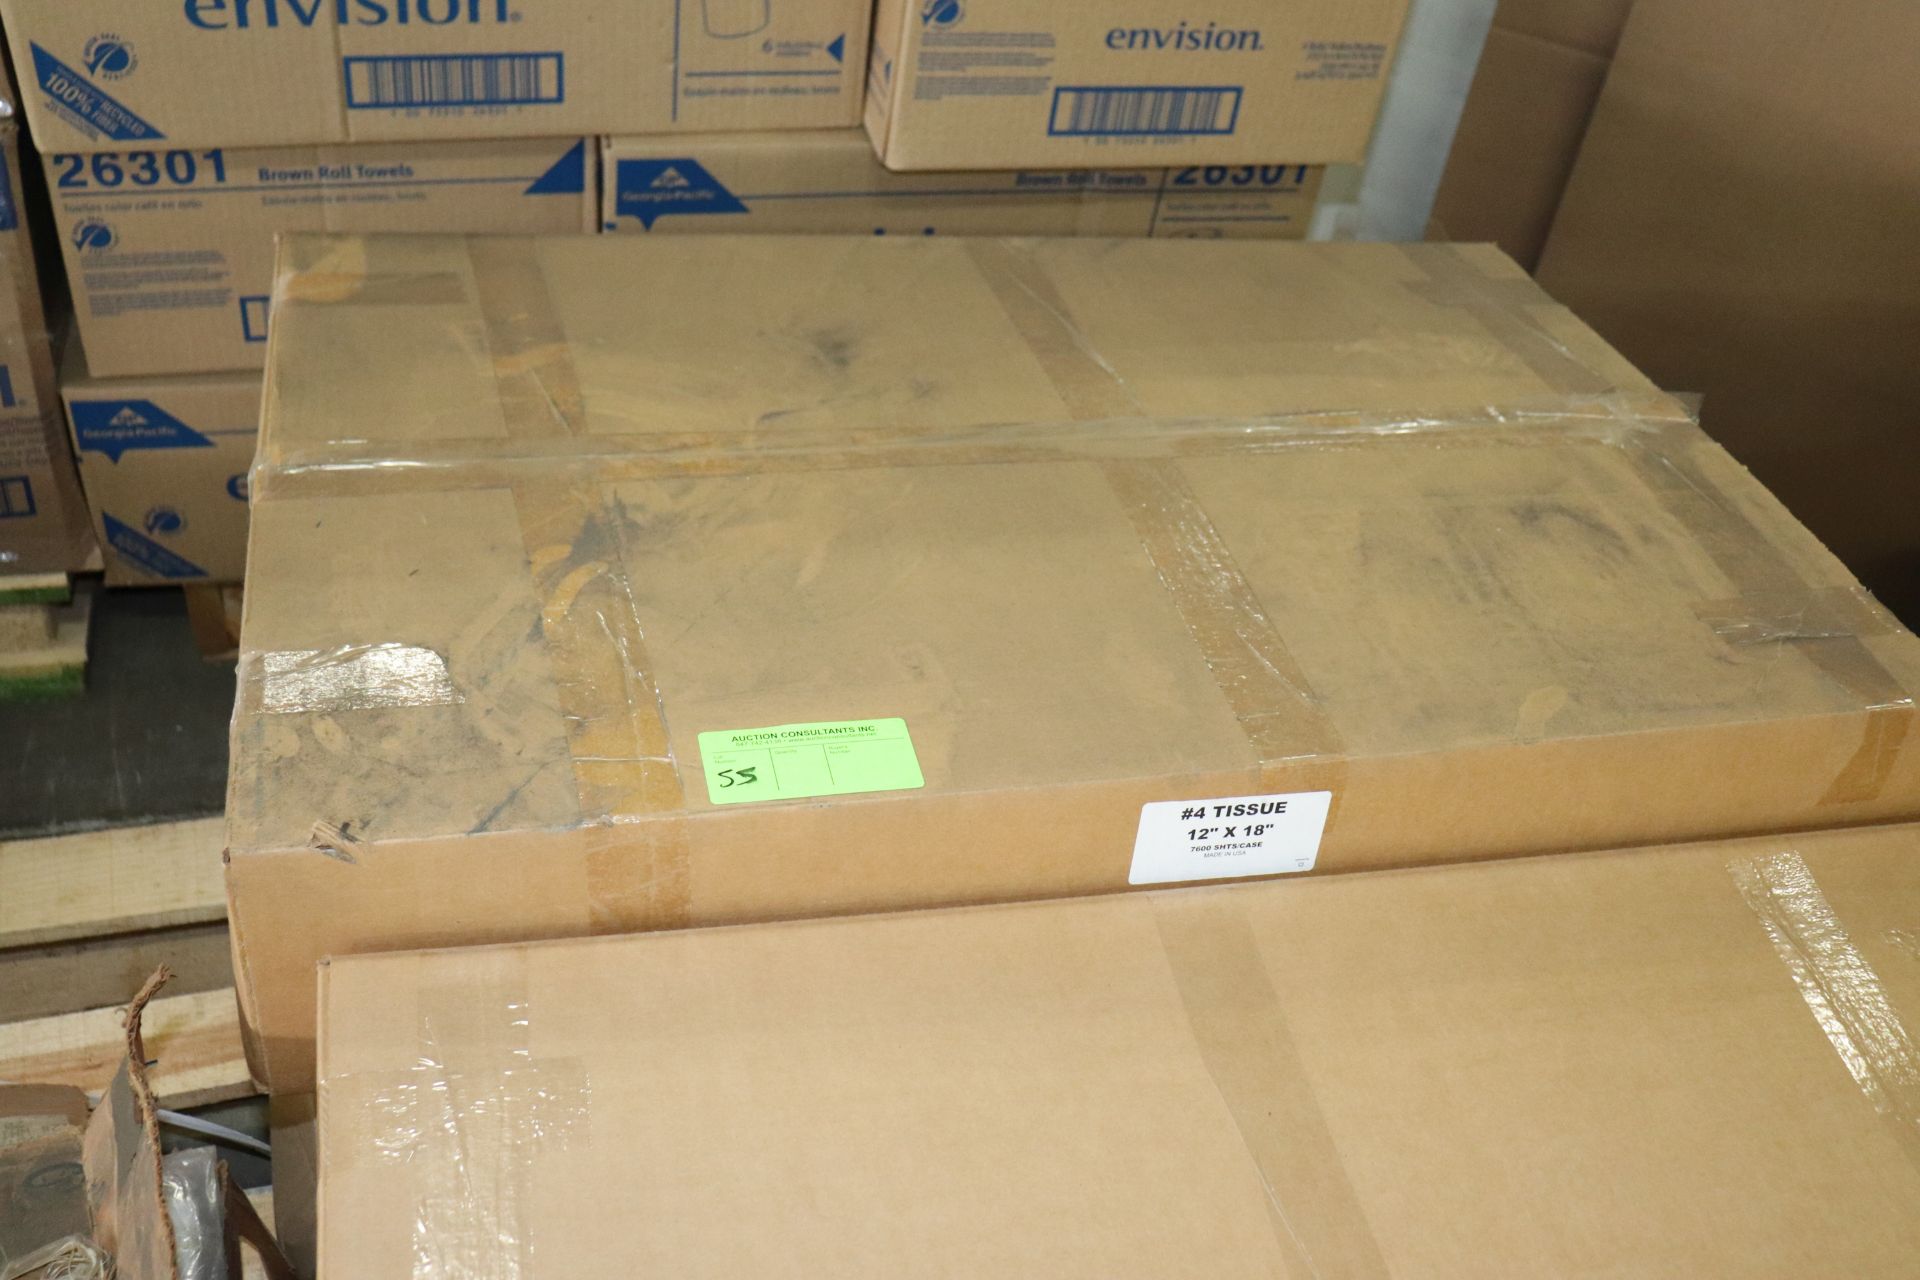 Three cases of #4 tissue, 12" x 18", 7600 sheets in a case